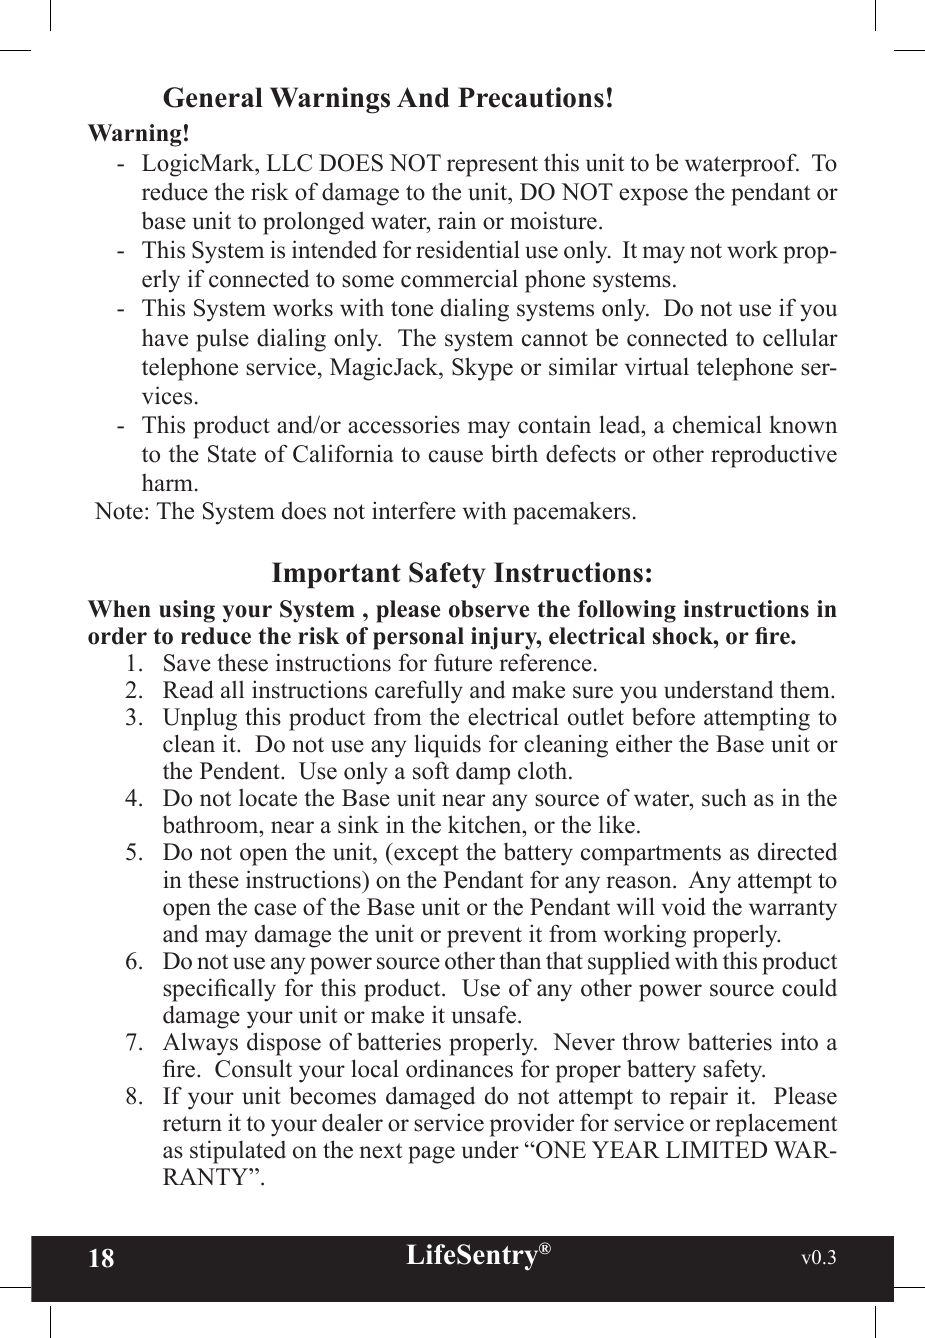 18 LifeSentry®                                                           v0.3   General Warnings And Precautions!Warning!-   LogicMark, LLC DOES NOT represent this unit to be waterproof.  To reduce the risk of damage to the unit, DO NOT expose the pendant or base unit to prolonged water, rain or moisture.-   This System is intended for residential use only.  It may not work prop-erly if connected to some commercial phone systems.-   This System works with tone dialing systems only.  Do not use if you have pulse dialing only.  The system cannot be connected to cellular telephone service, MagicJack, Skype or similar virtual telephone ser-vices.-   This product and/or accessories may contain lead, a chemical known to the State of California to cause birth defects or other reproductive harm.Note: The System does not interfere with pacemakers.Important Safety Instructions:When using your System , please observe the following instructions in order to reduce the risk of personal injury, electrical shock, or re.1.  Save these instructions for future reference.2.  Read all instructions carefully and make sure you understand them.3.  Unplug this product from the electrical outlet before attempting to clean it.  Do not use any liquids for cleaning either the Base unit or the Pendent.  Use only a soft damp cloth.4.  Do not locate the Base unit near any source of water, such as in the bathroom, near a sink in the kitchen, or the like.5.  Do not open the unit, (except the battery compartments as directed in these instructions) on the Pendant for any reason.  Any attempt to open the case of the Base unit or the Pendant will void the warranty and may damage the unit or prevent it from working properly.6.  Do not use any power source other than that supplied with this product specically for this product.  Use of any other power source could damage your unit or make it unsafe.7.  Always dispose of batteries properly.  Never throw batteries into a re.  Consult your local ordinances for proper battery safety.  8.  If your unit becomes damaged do not attempt to repair it.  Please return it to your dealer or service provider for service or replacement as stipulated on the next page under “ONE YEAR LIMITED WAR-RANTY”.